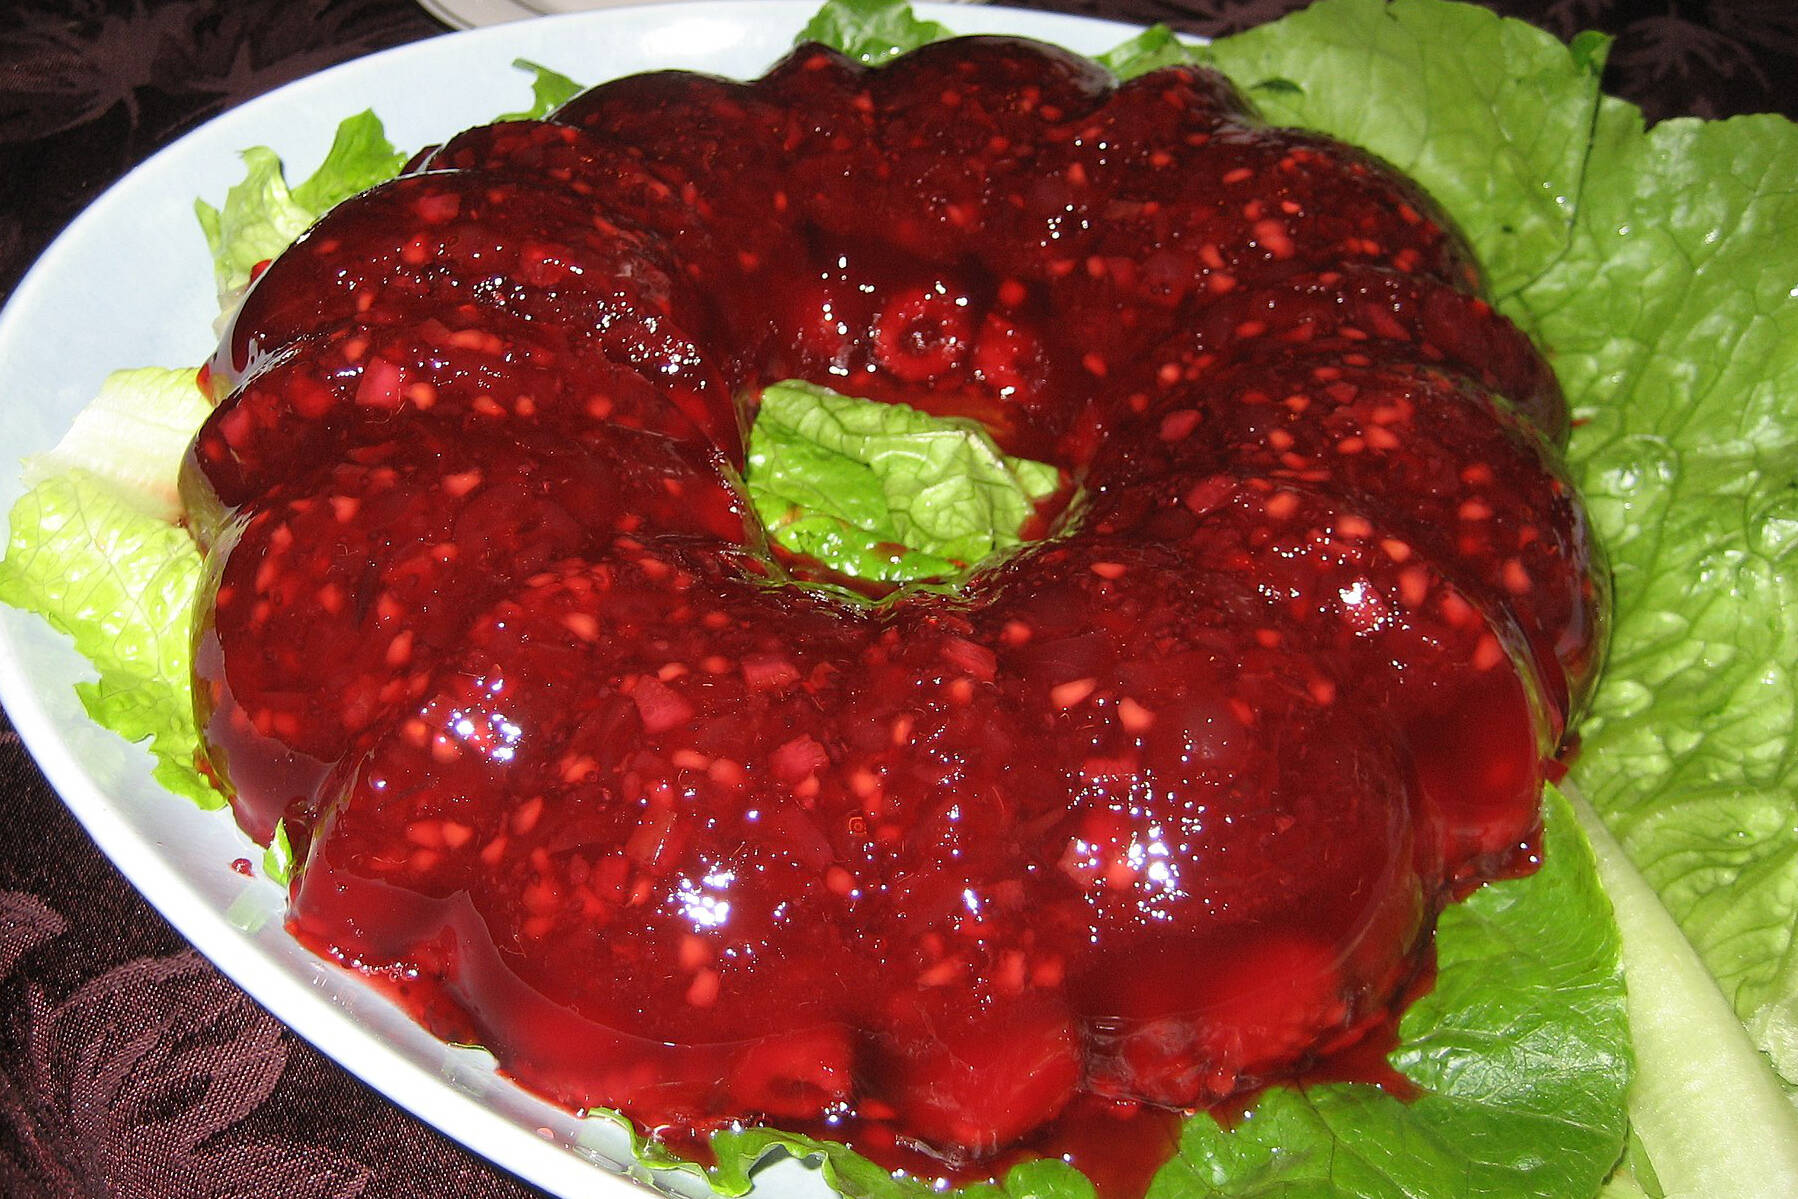 A Jell-O salad was once seen at many potlucks. Today, it is not as common. Other foods, including liver and onions, are also losing their former popularity. (Wikimedia Commons)